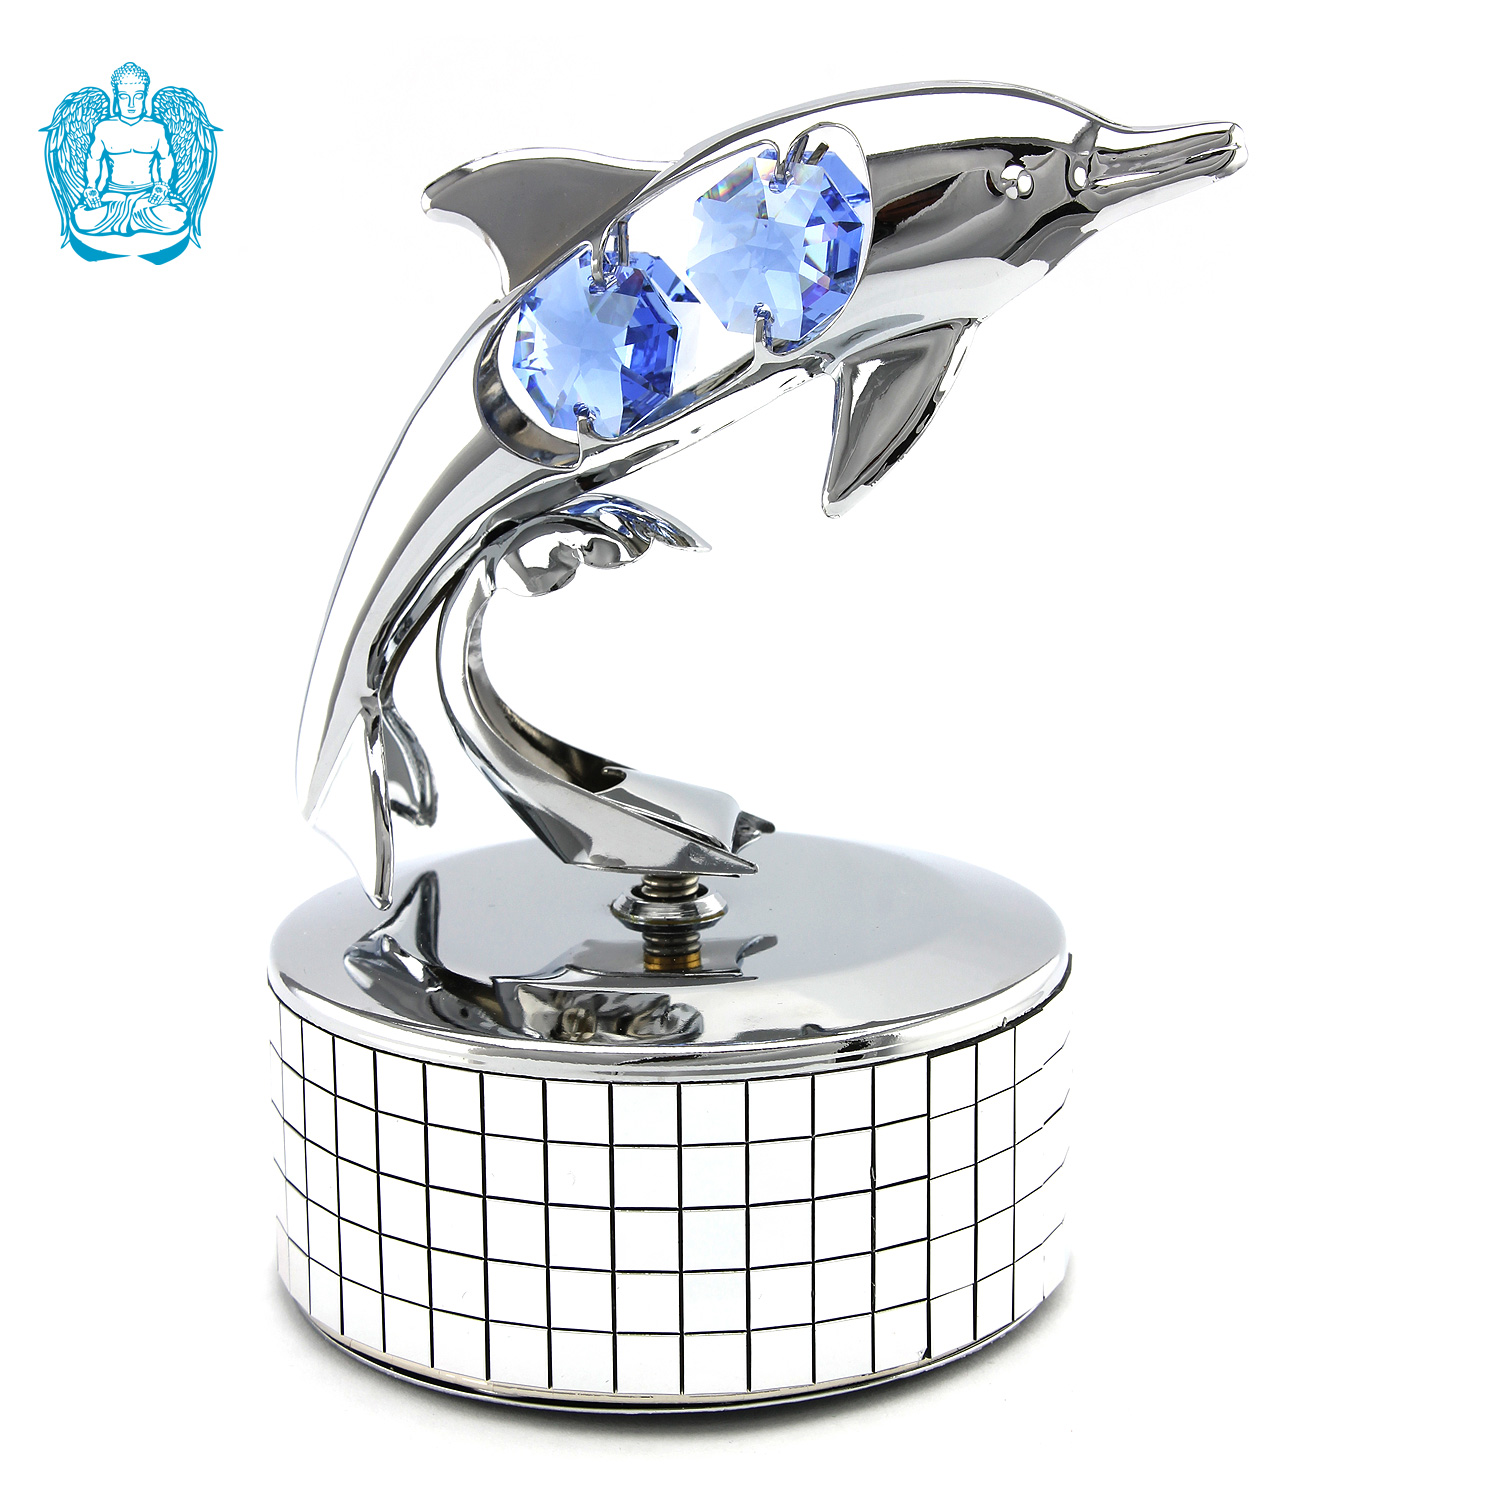 Crystocraft Dolphin Music Box - Silver/Blue